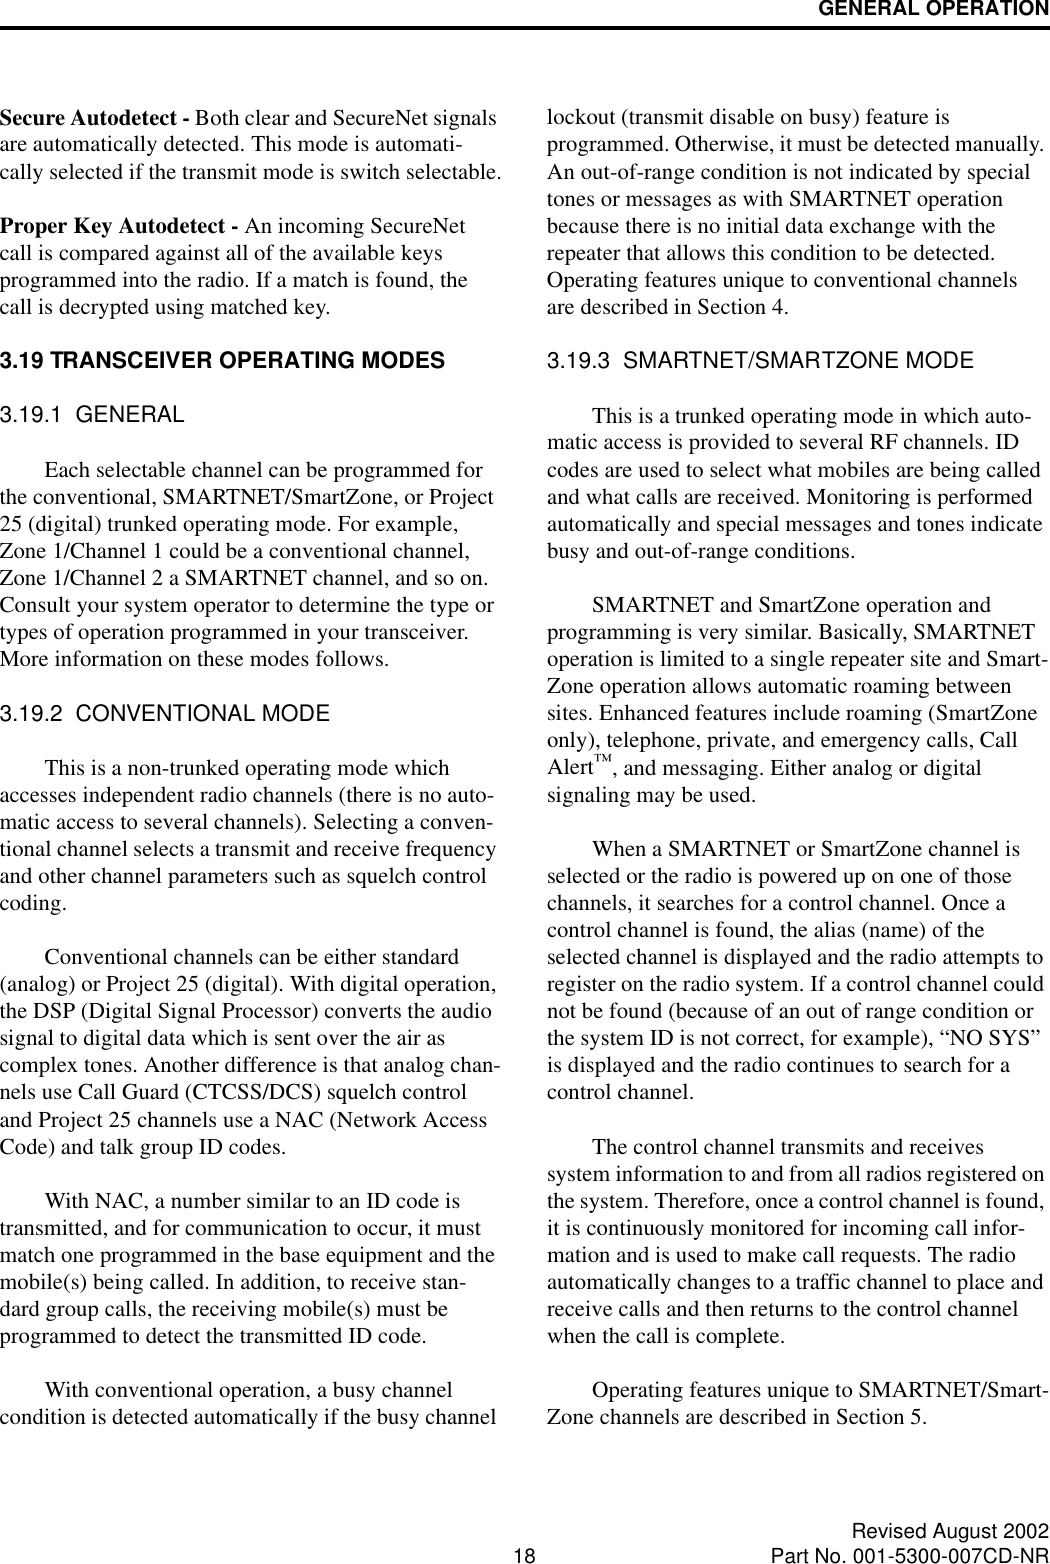 GENERAL OPERATION18 Revised August 2002Part No. 001-5300-007CD-NRSecure Autodetect - Both clear and SecureNet signals are automatically detected. This mode is automati-cally selected if the transmit mode is switch selectable.Proper Key Autodetect - An incoming SecureNet call is compared against all of the available keys programmed into the radio. If a match is found, the call is decrypted using matched key. 3.19 TRANSCEIVER OPERATING MODES3.19.1  GENERALEach selectable channel can be programmed for the conventional, SMARTNET/SmartZone, or Project 25 (digital) trunked operating mode. For example, Zone 1/Channel 1 could be a conventional channel, Zone 1/Channel 2 a SMARTNET channel, and so on. Consult your system operator to determine the type or types of operation programmed in your transceiver. More information on these modes follows.3.19.2  CONVENTIONAL MODEThis is a non-trunked operating mode which accesses independent radio channels (there is no auto-matic access to several channels). Selecting a conven-tional channel selects a transmit and receive frequency and other channel parameters such as squelch control coding. Conventional channels can be either standard (analog) or Project 25 (digital). With digital operation, the DSP (Digital Signal Processor) converts the audio signal to digital data which is sent over the air as complex tones. Another difference is that analog chan-nels use Call Guard (CTCSS/DCS) squelch control and Project 25 channels use a NAC (Network Access Code) and talk group ID codes. With NAC, a number similar to an ID code is transmitted, and for communication to occur, it must match one programmed in the base equipment and the mobile(s) being called. In addition, to receive stan-dard group calls, the receiving mobile(s) must be programmed to detect the transmitted ID code. With conventional operation, a busy channel condition is detected automatically if the busy channel lockout (transmit disable on busy) feature is programmed. Otherwise, it must be detected manually. An out-of-range condition is not indicated by special tones or messages as with SMARTNET operation because there is no initial data exchange with the repeater that allows this condition to be detected. Operating features unique to conventional channels are described in Section 4.3.19.3  SMARTNET/SMARTZONE MODEThis is a trunked operating mode in which auto-matic access is provided to several RF channels. ID codes are used to select what mobiles are being called and what calls are received. Monitoring is performed automatically and special messages and tones indicate busy and out-of-range conditions. SMARTNET and SmartZone operation and programming is very similar. Basically, SMARTNET operation is limited to a single repeater site and Smart-Zone operation allows automatic roaming between sites. Enhanced features include roaming (SmartZone only), telephone, private, and emergency calls, Call Alert™, and messaging. Either analog or digital signaling may be used. When a SMARTNET or SmartZone channel is selected or the radio is powered up on one of those channels, it searches for a control channel. Once a control channel is found, the alias (name) of the selected channel is displayed and the radio attempts to register on the radio system. If a control channel could not be found (because of an out of range condition or the system ID is not correct, for example), “NO SYS” is displayed and the radio continues to search for a control channel.The control channel transmits and receives system information to and from all radios registered on the system. Therefore, once a control channel is found, it is continuously monitored for incoming call infor-mation and is used to make call requests. The radio automatically changes to a traffic channel to place and receive calls and then returns to the control channel when the call is complete.Operating features unique to SMARTNET/Smart-Zone channels are described in Section 5.